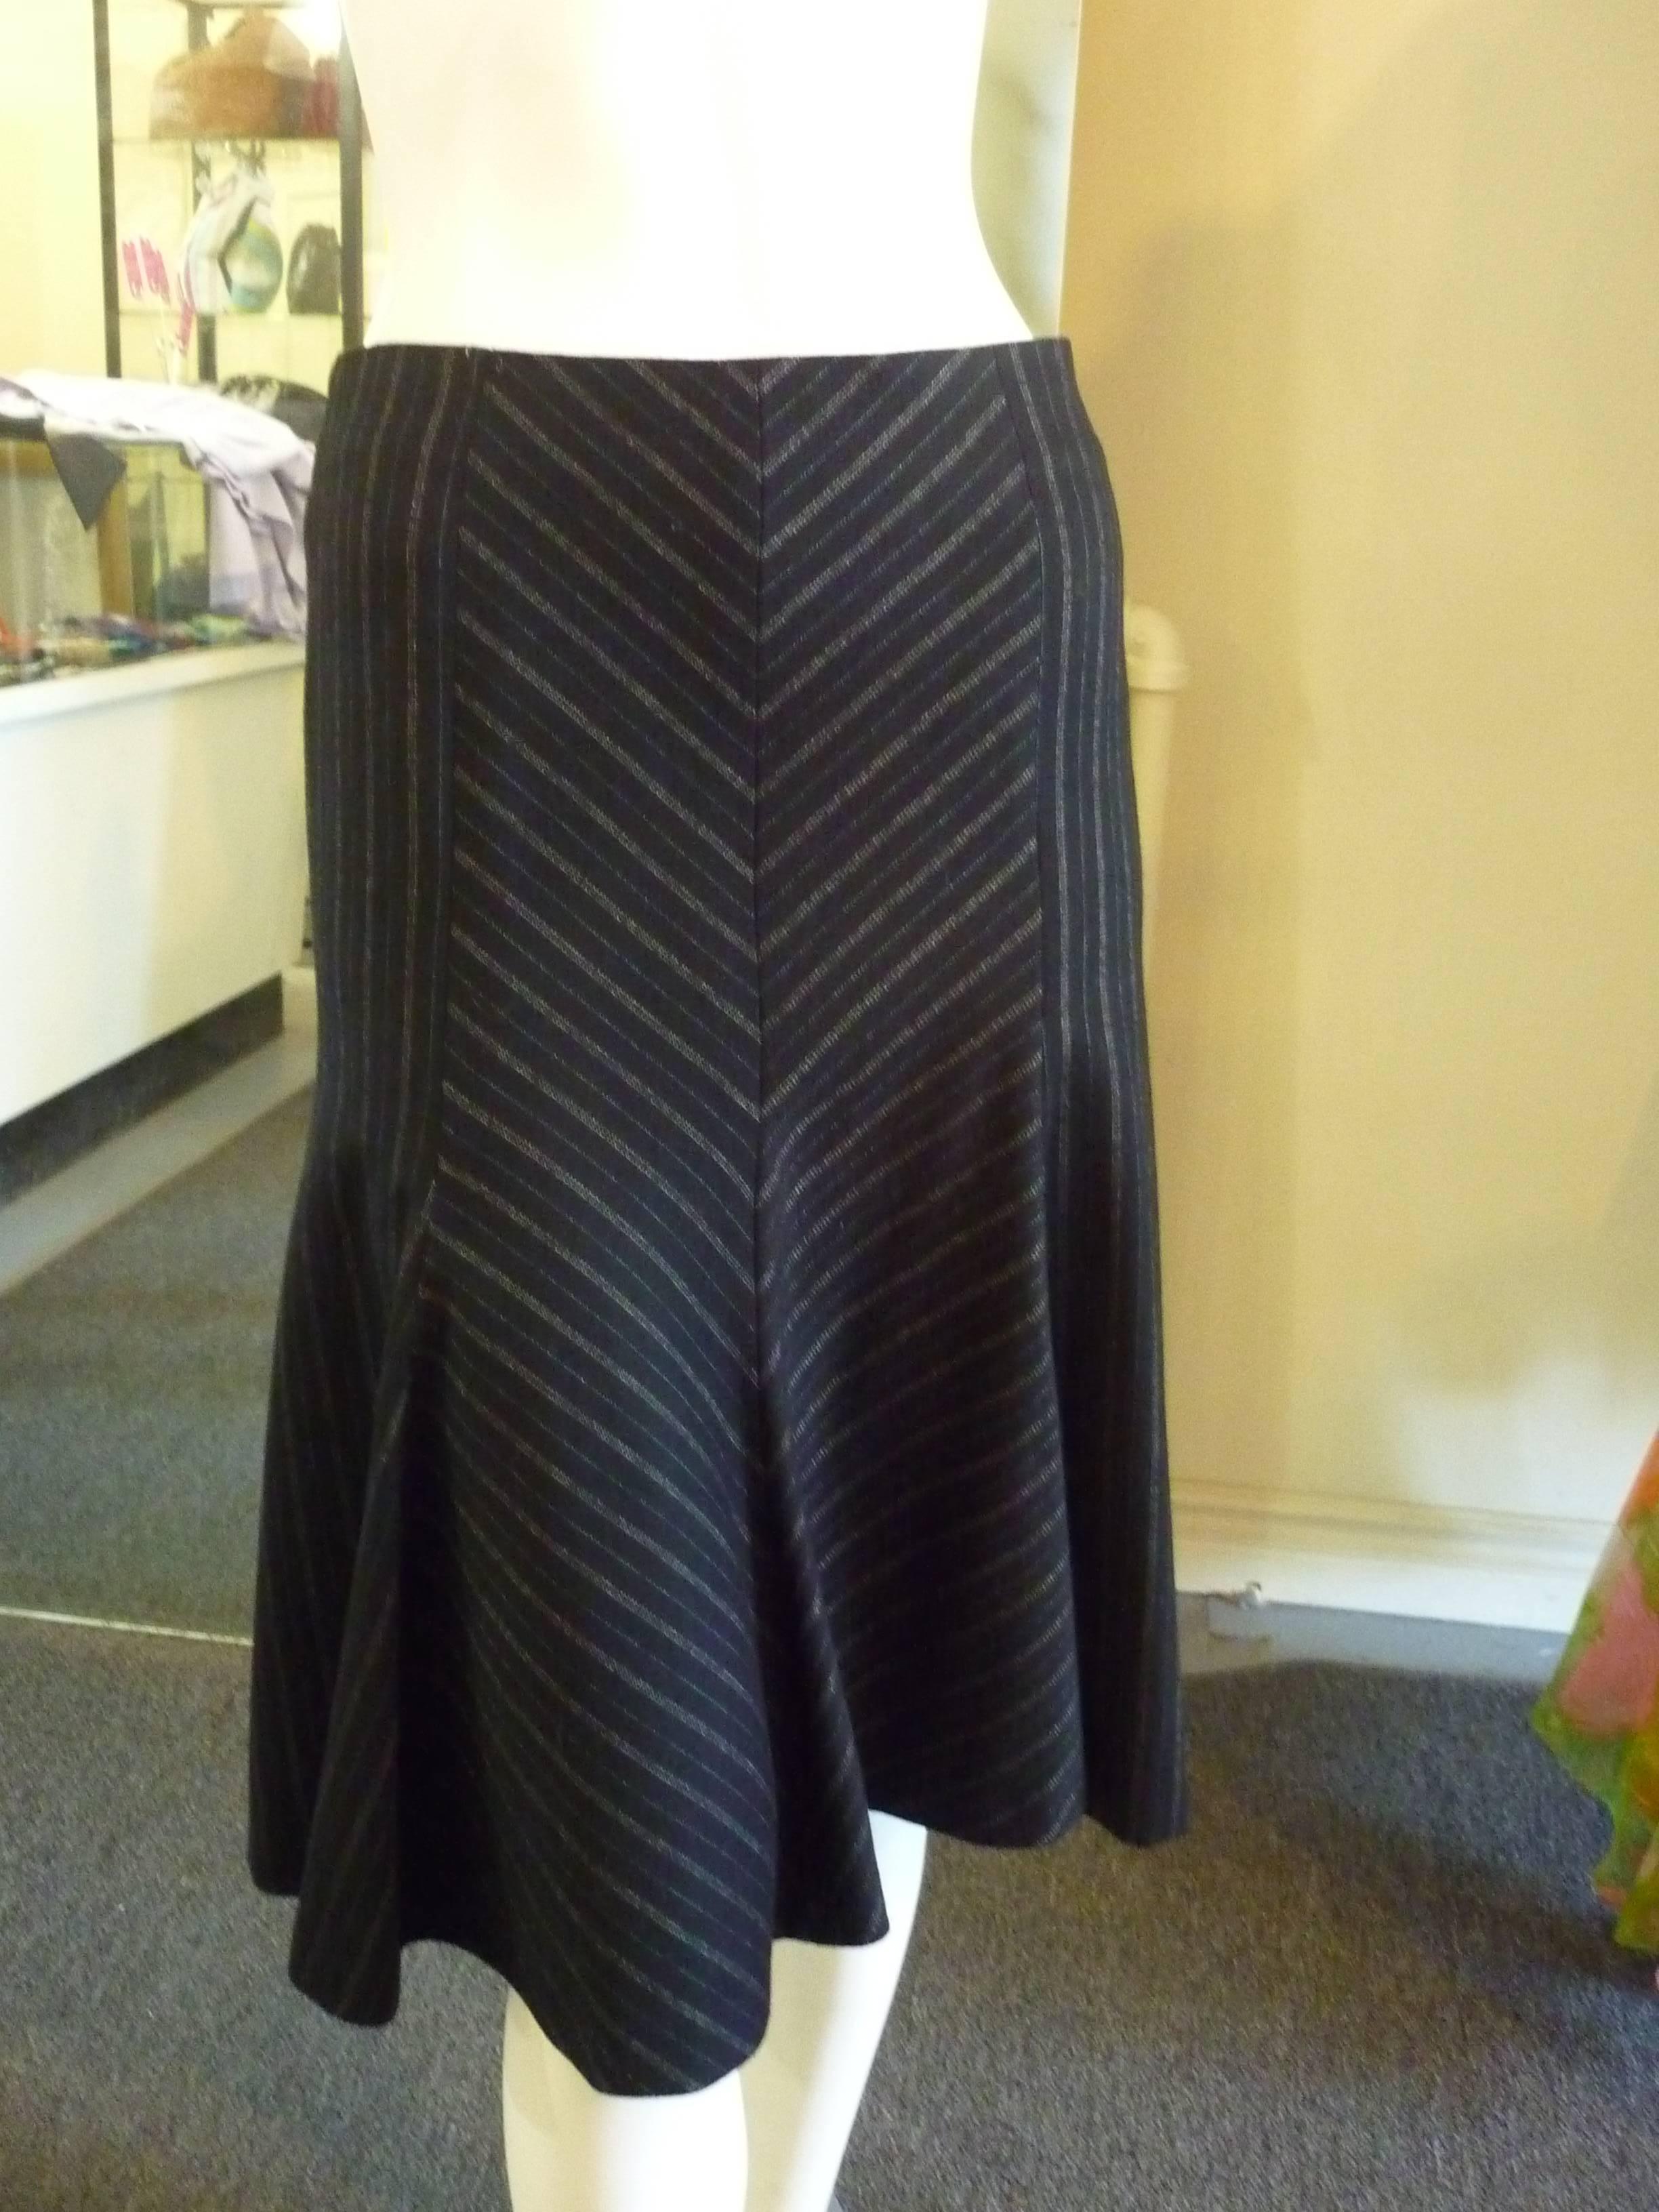 This a-line skirt with godet bottom, has a chevron and stripe pattern. What sets it apart from a regular skirt is the addition of the cummerbund. Your choice, on or off!

The skirt is lined with the Missoni chevron pattern.